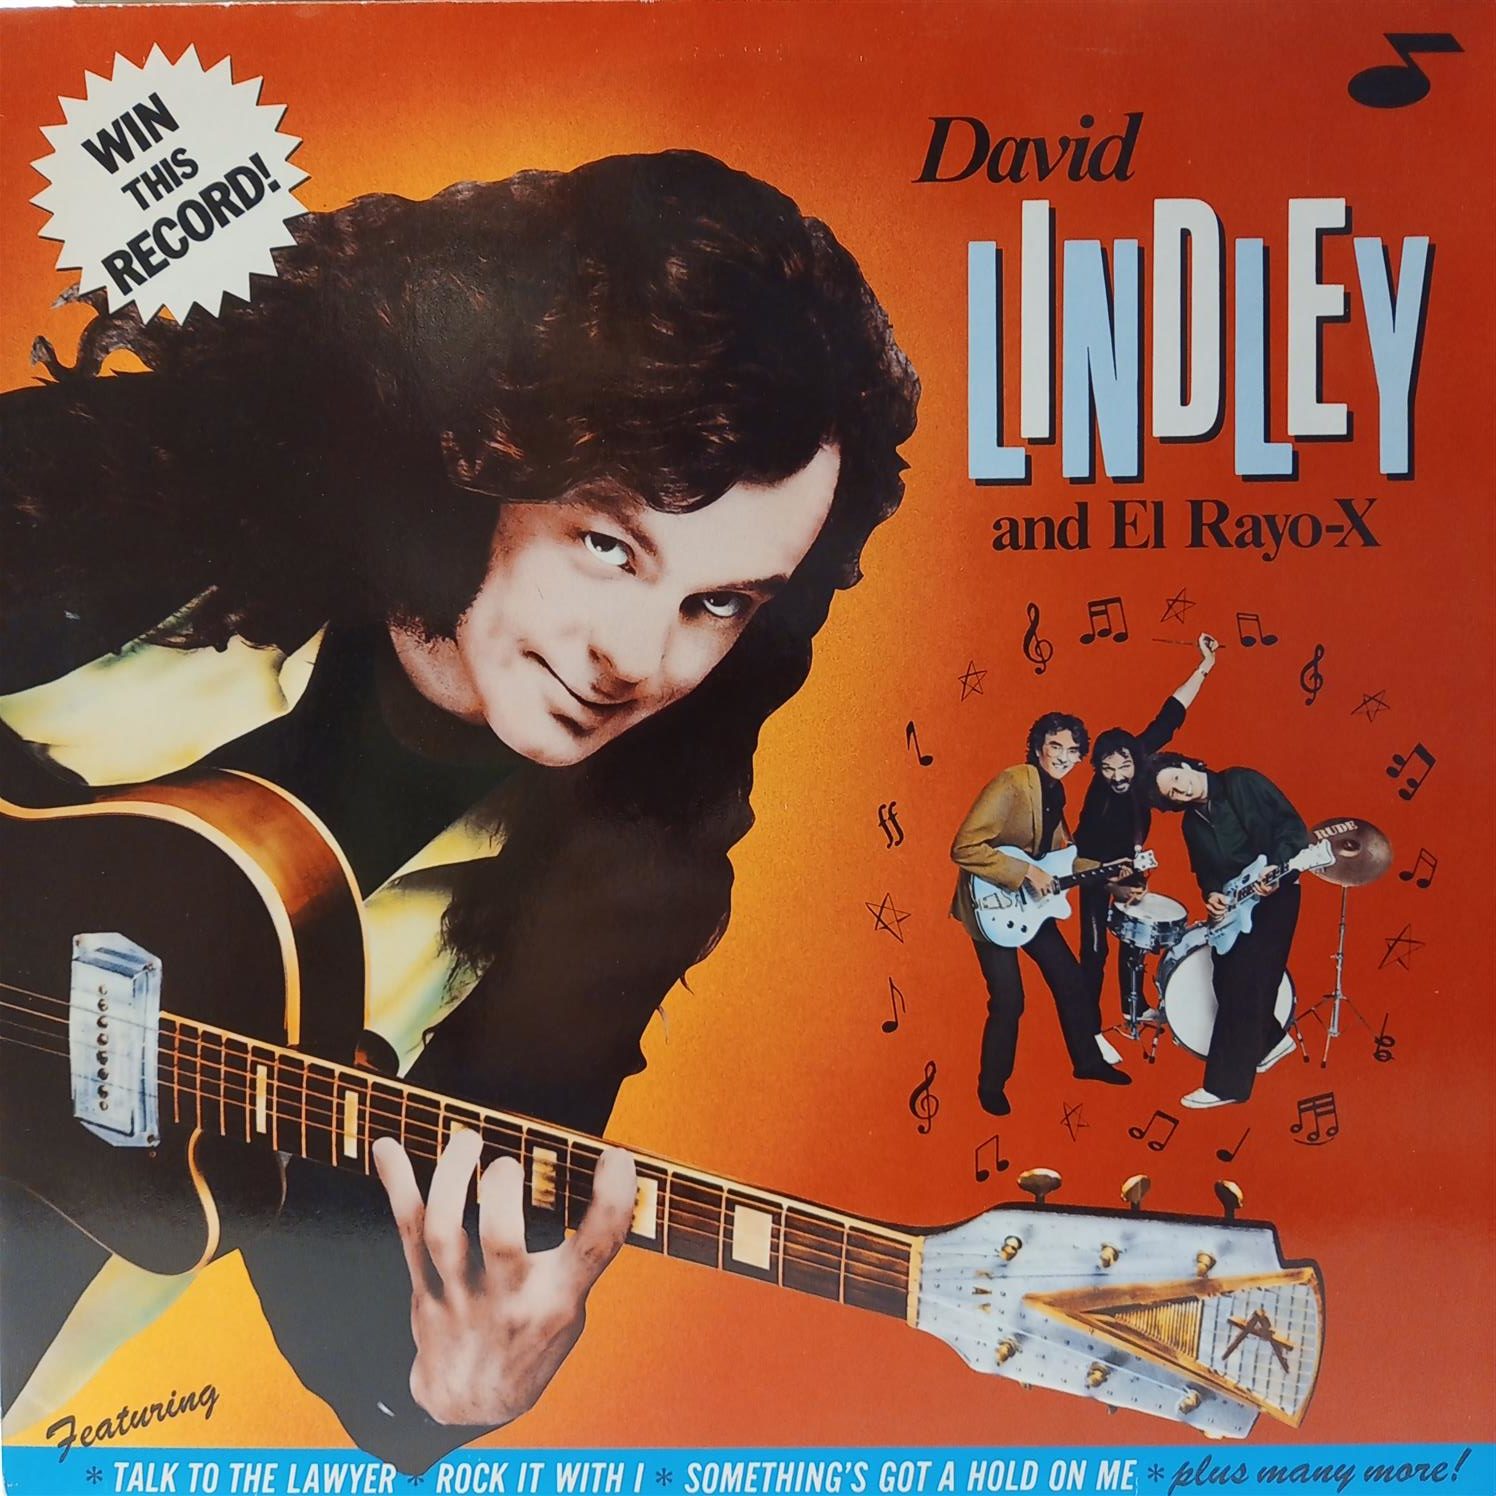 DAVID LINDLEY AND EL RAYO-X – WIN THIS RECORD ON